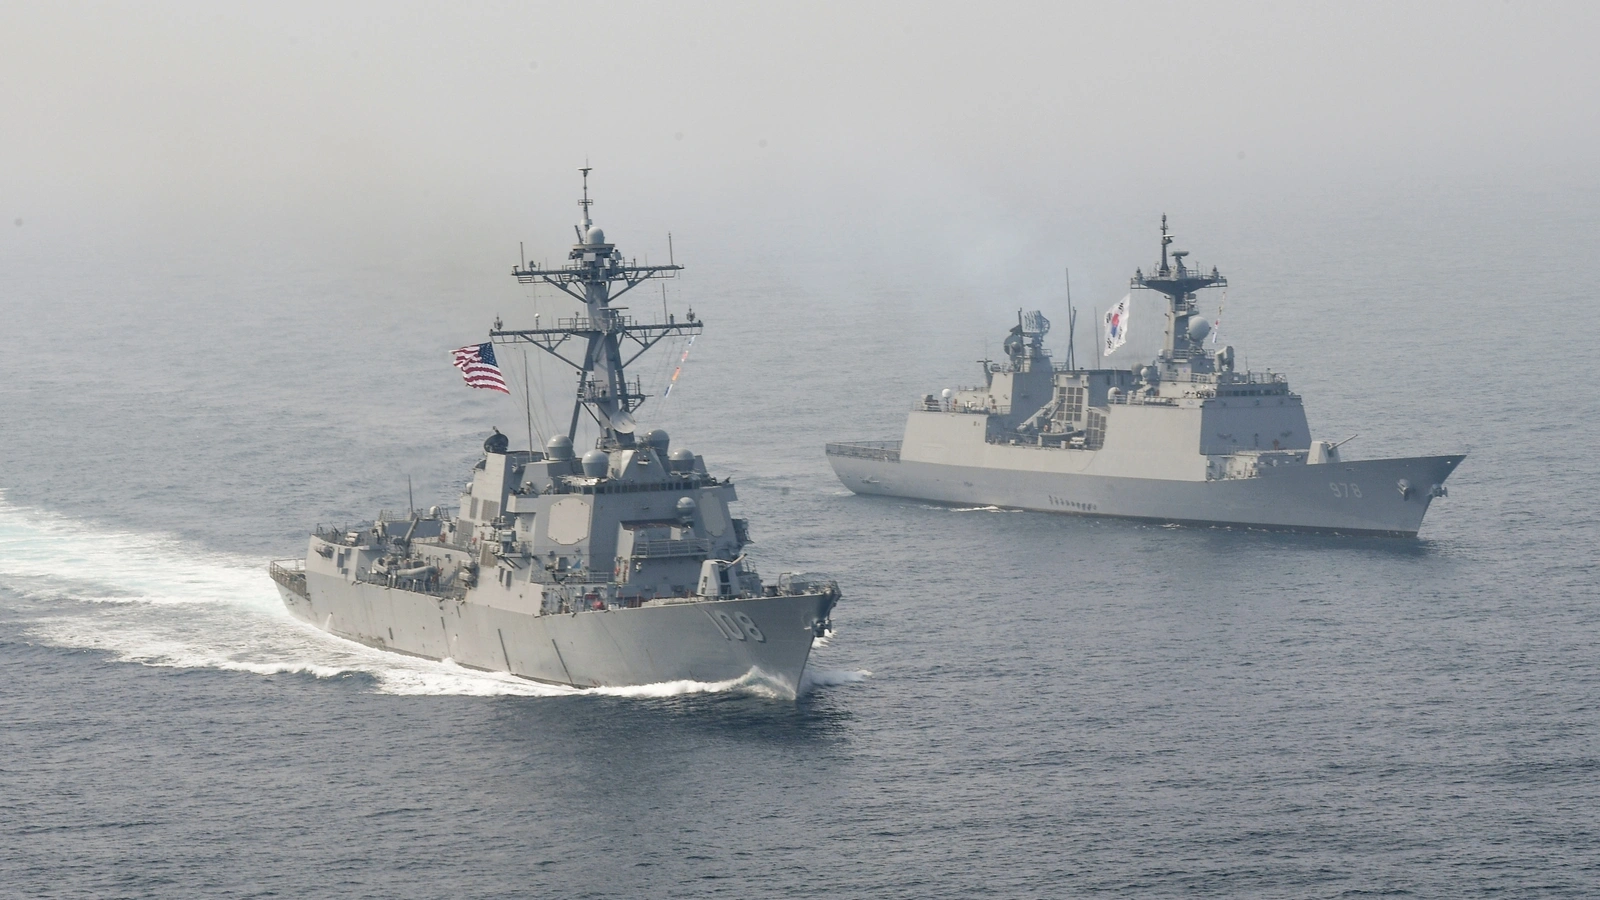 The U.S. Navy Arleigh Burke-class guided-missile destroyer USS Wayne E. Meyer sails alongside South Korean multirole guided-missile destroyer Wang Geon during a bilateral exercise in the western Pacific Ocean. April 25, 2017.